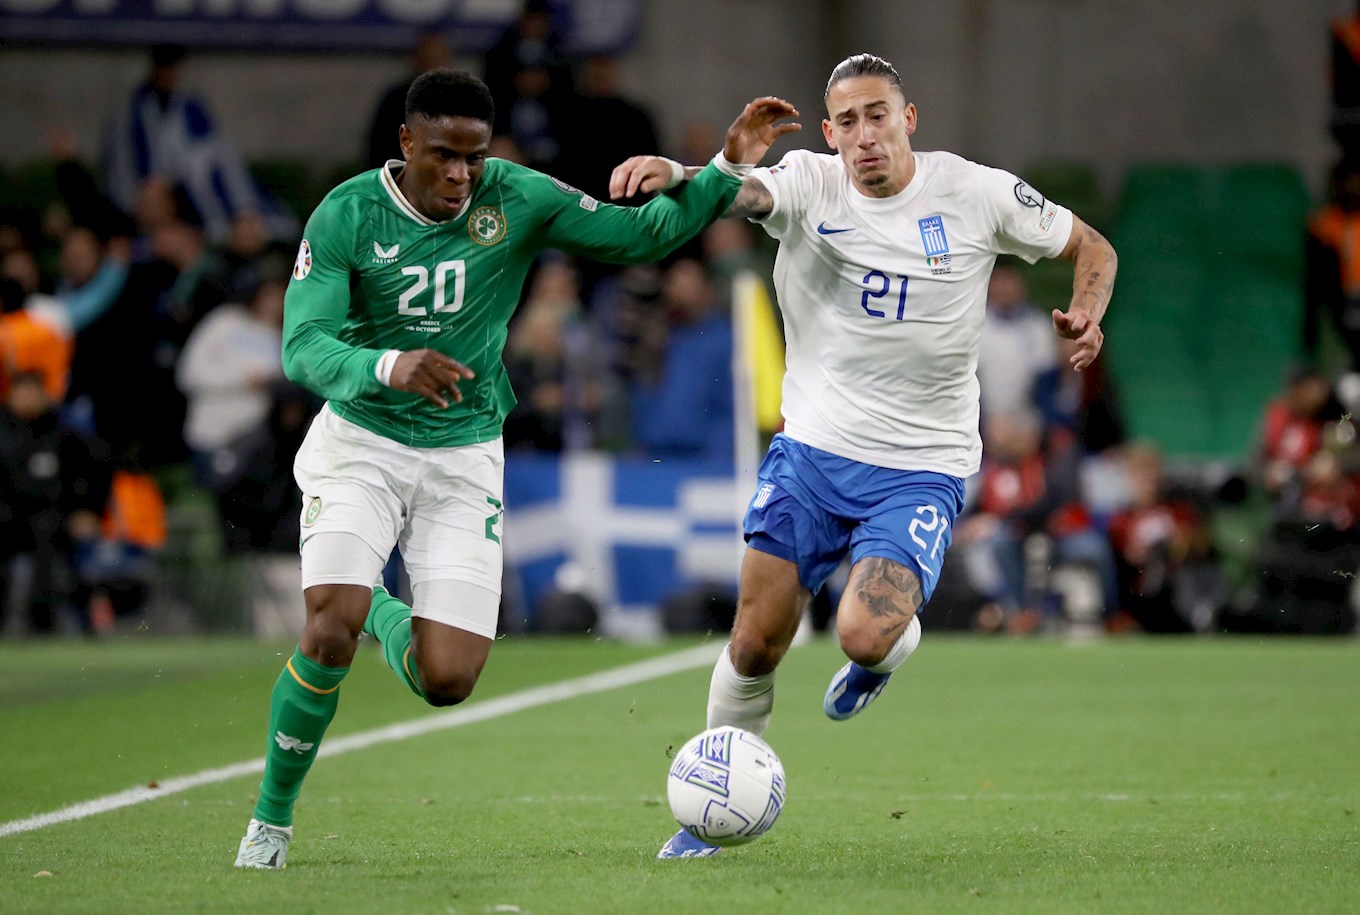 Chieo Ogbene sprinting past Liverpool's Kostas Tsimikas in Republic of Ireland's Euro qualifier defeat against Greece.